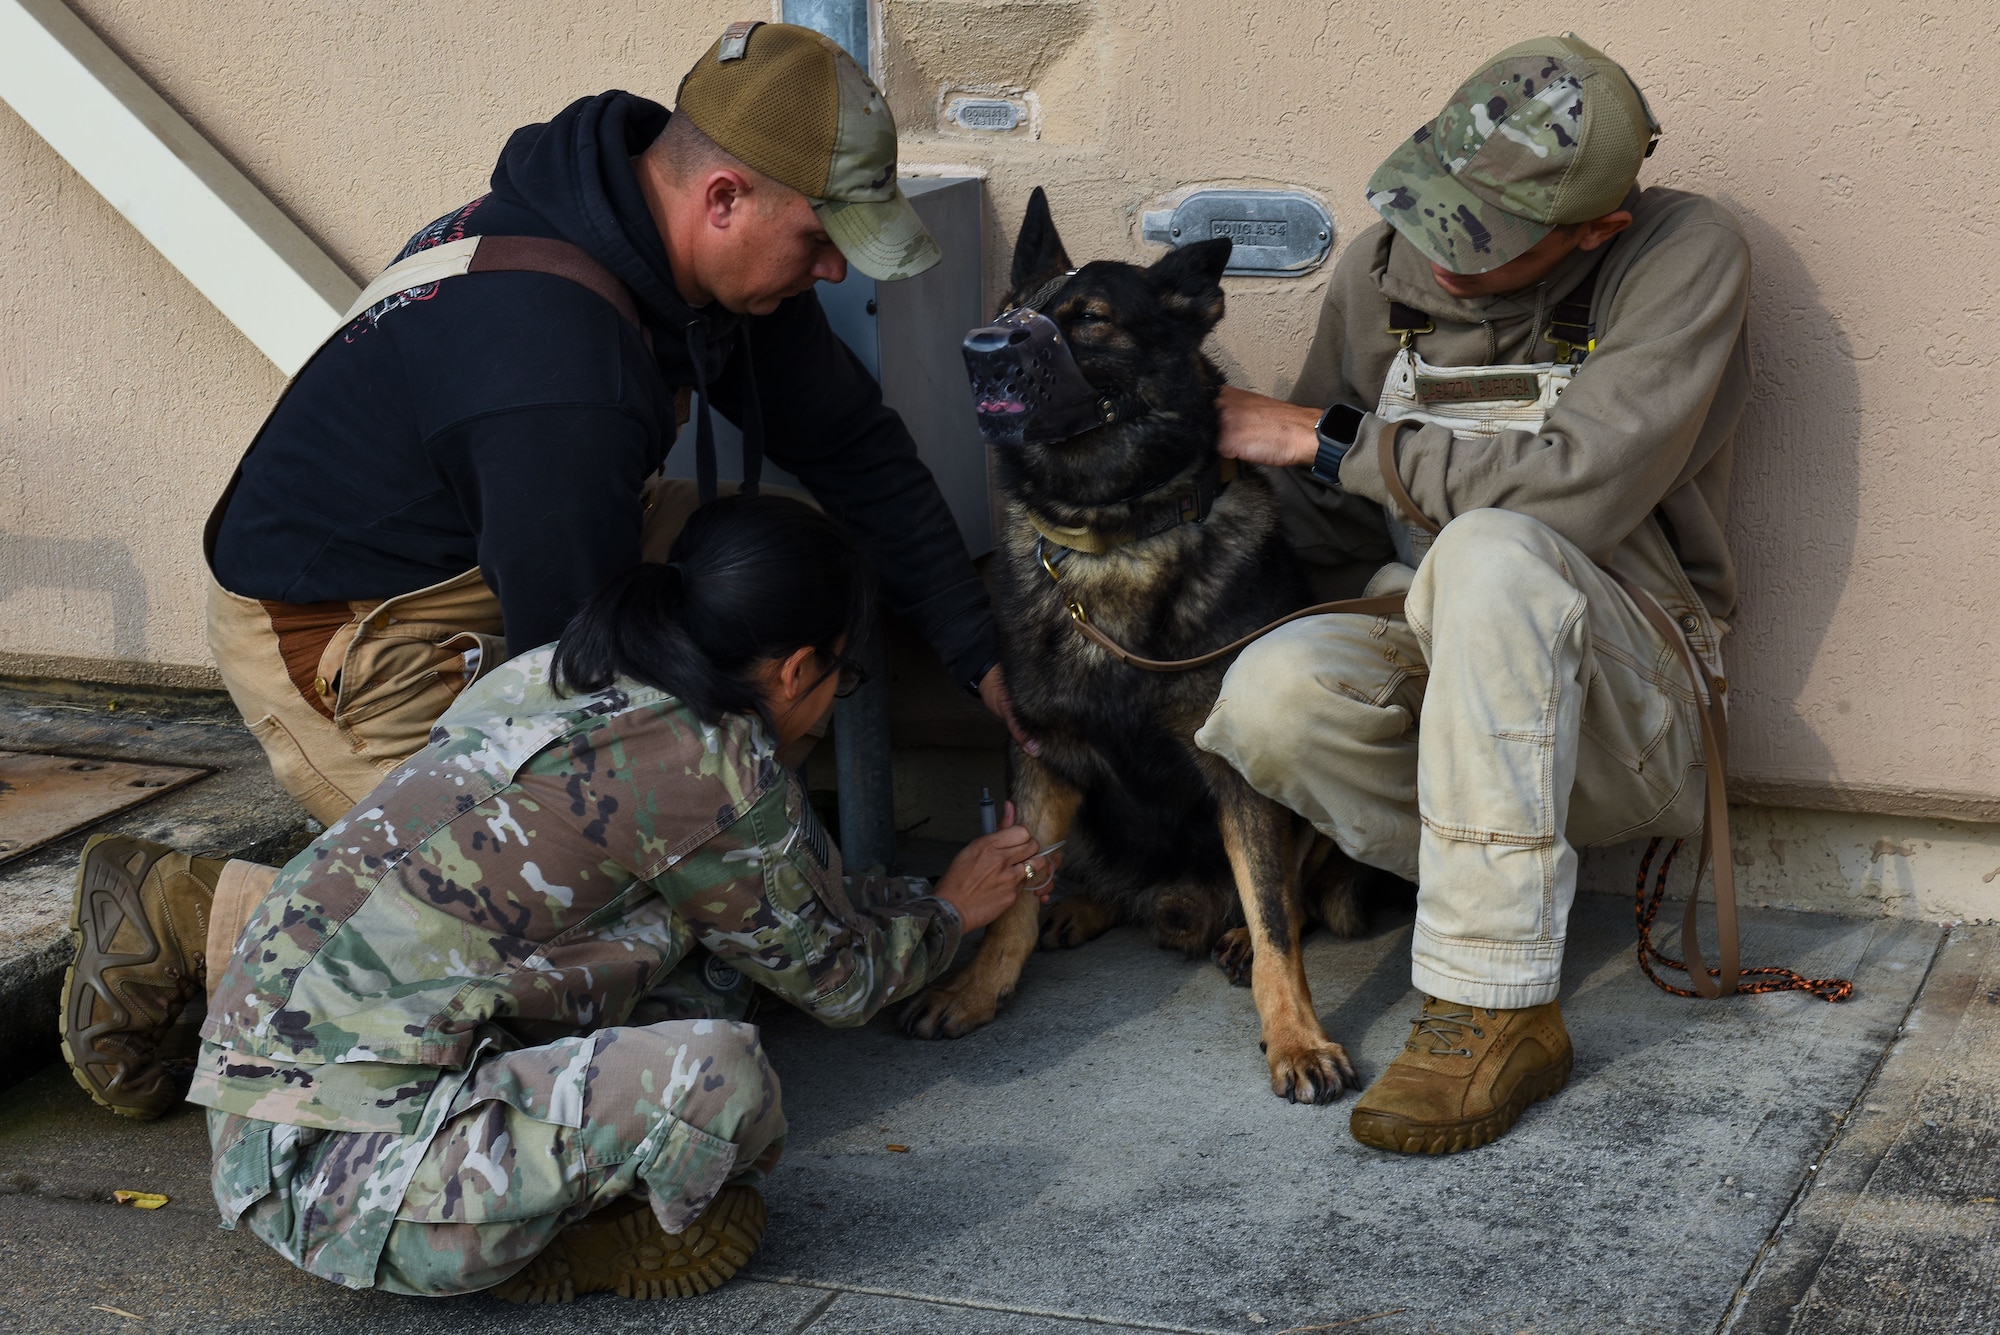 Members of the 8th Security Forces Squadron military working dog kennels assist U.S. Army Capt. Denise Sorbet, 106th Medical Detachment Veterinary Service Support Team II officer in charge, (bottom left) as she draws blood from MWD Nex during a routine checkup at Kunsan Air Base, Republic of Korea, Nov. 16, 2022. Sorbet and her veterinarian aids work hand-in-hand with the 8th Security Forces Squadron MWD handlers to ensure the canines remain healthy and ready for duty. (U.S. Air Force photo by Tech. Sgt. Timothy Dischinat)